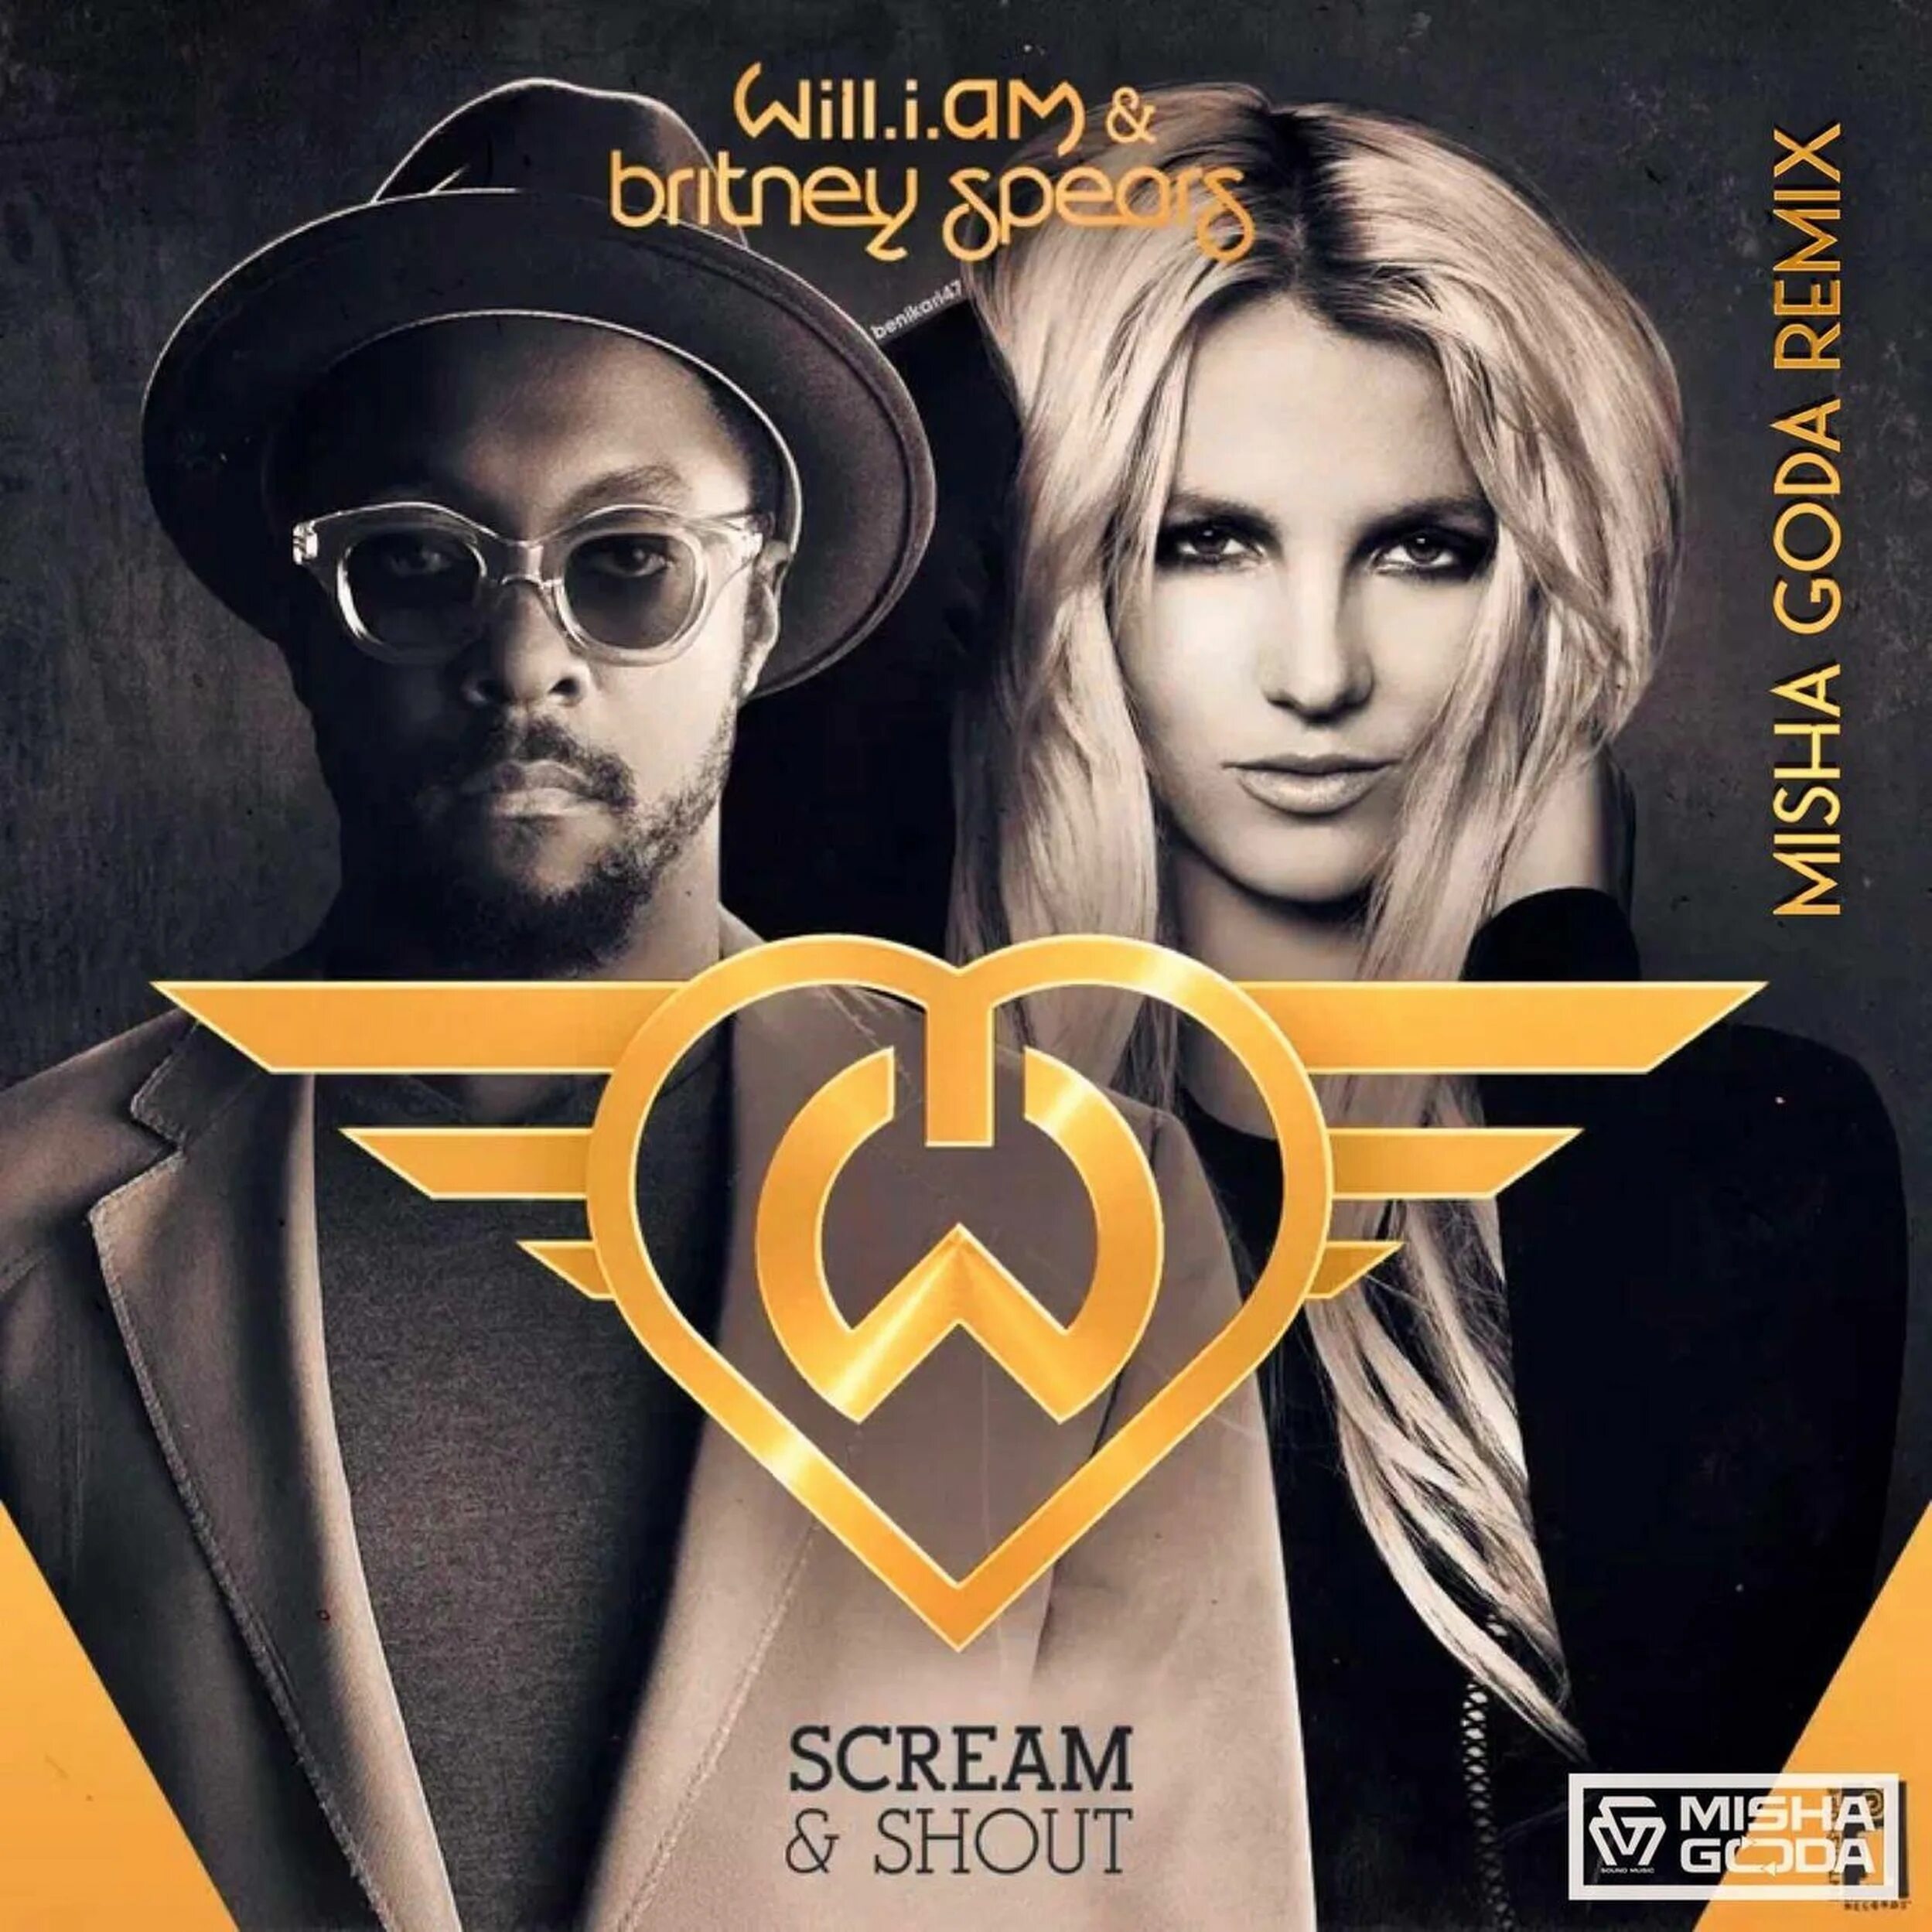 Screaming feat. Бритни Спирс will i am. Бритни Спирс Scream. Britney Spears Scream and Shout. Will i am Britney Spears Scream Shout.